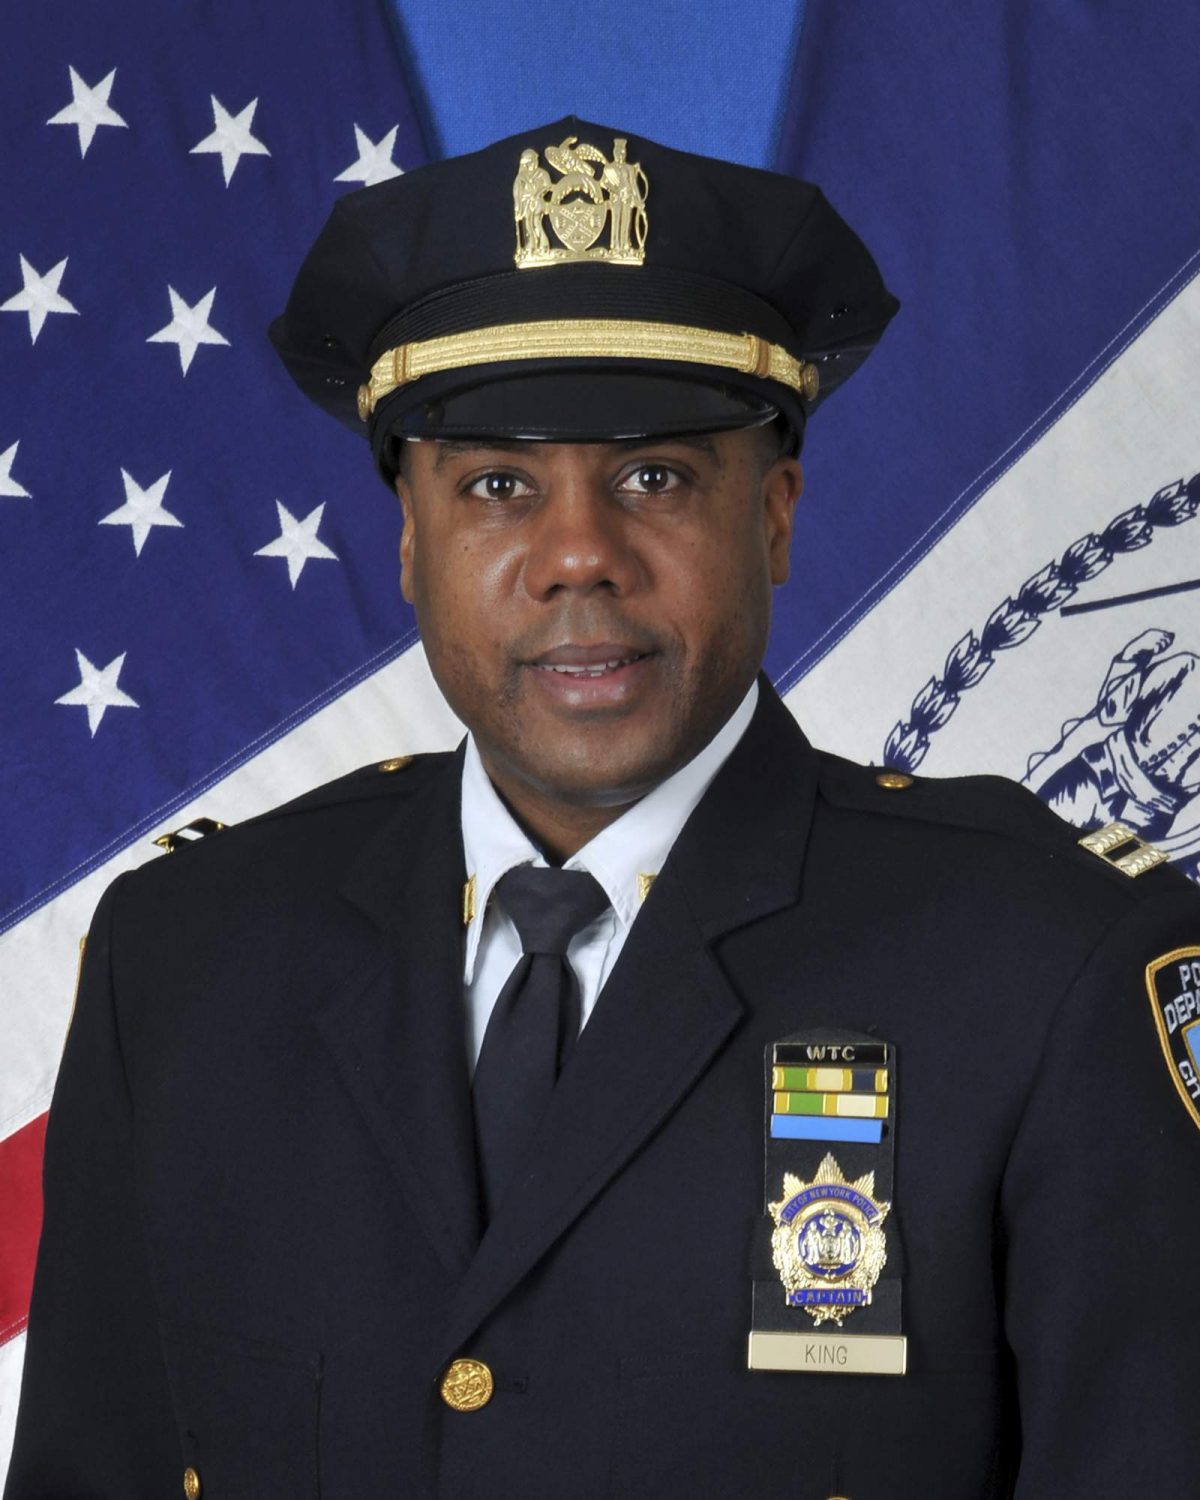 This photo, provided by the New York City Police Department, shows Deputy Inspector Michael King. The new head of New York City’s sex crimes unit is not only a veteran investigator, but also a forensic nurse who has conducted the physical exams and evidence collection that are vital to solving such cases.